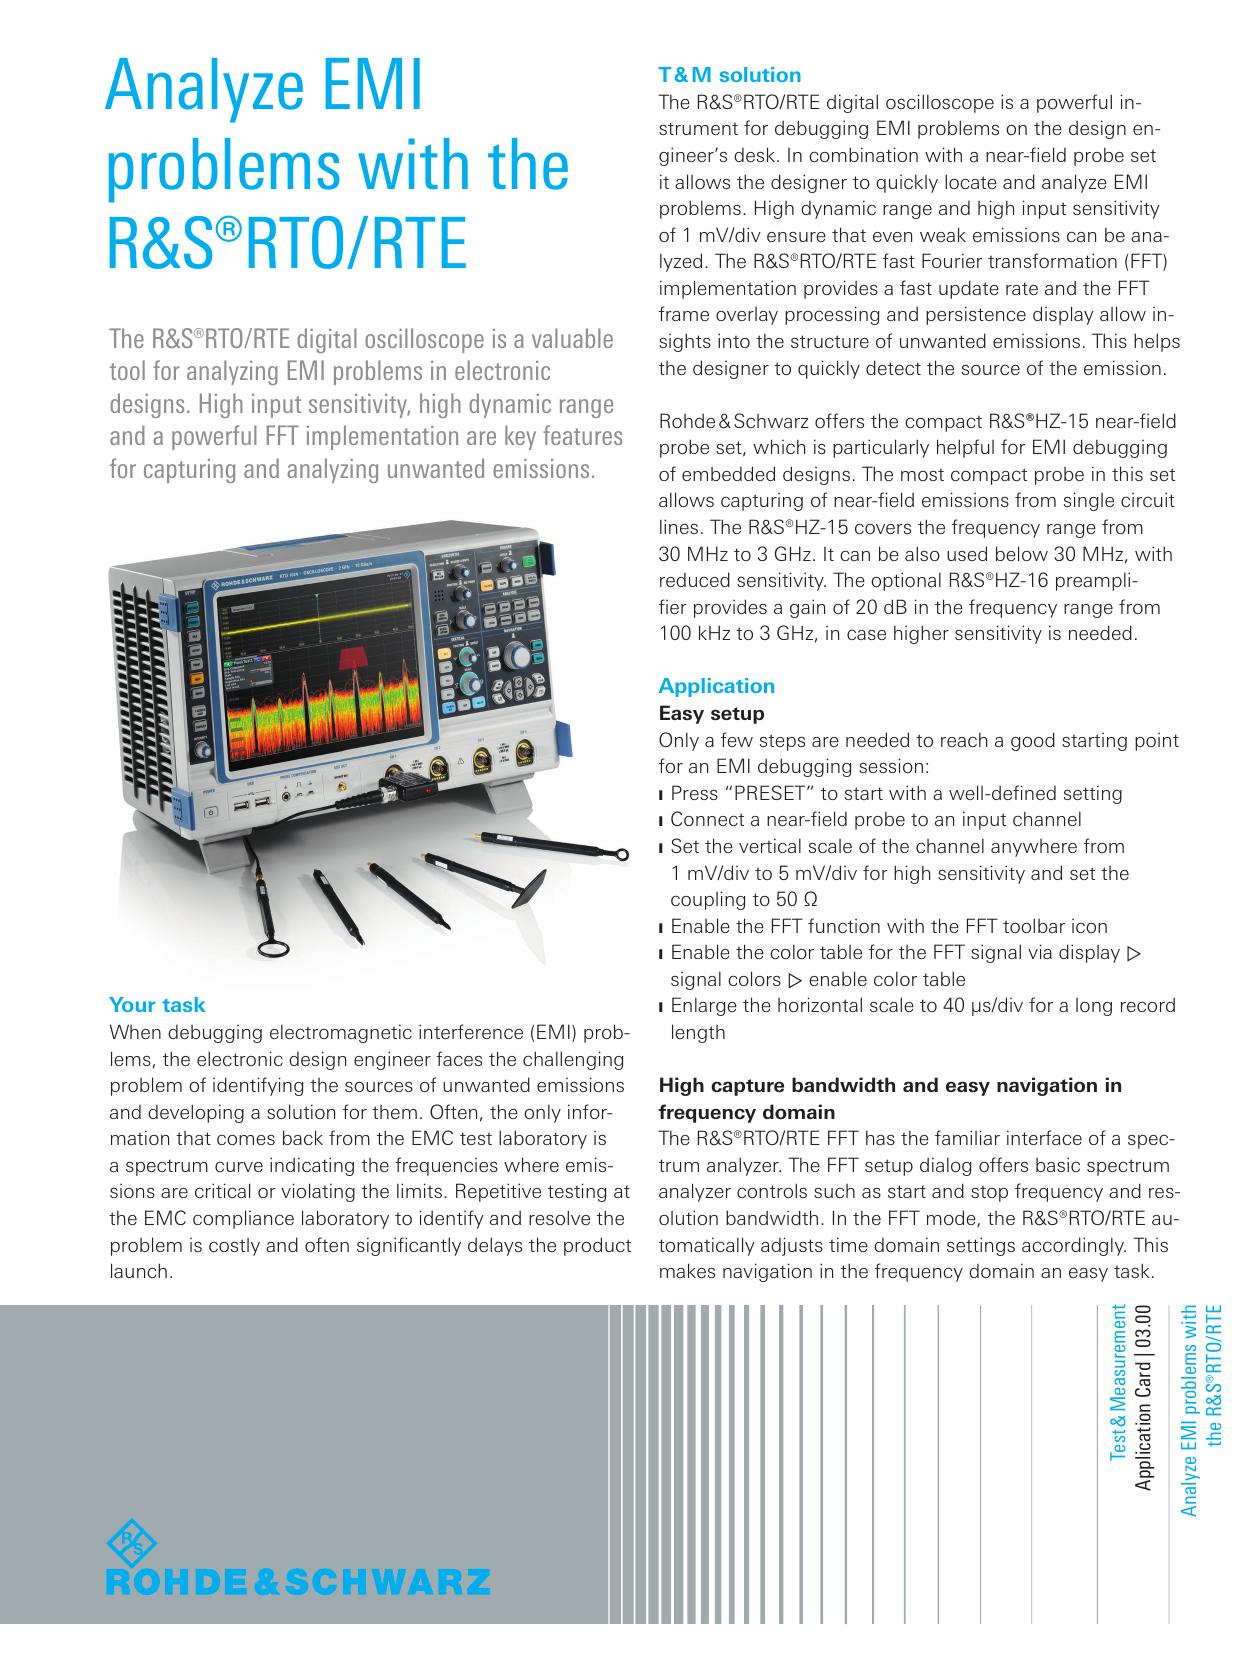 Application Card (english) for Analyze EMI problems with the R&S®RTO/R&S®RTE digital oscilloscope